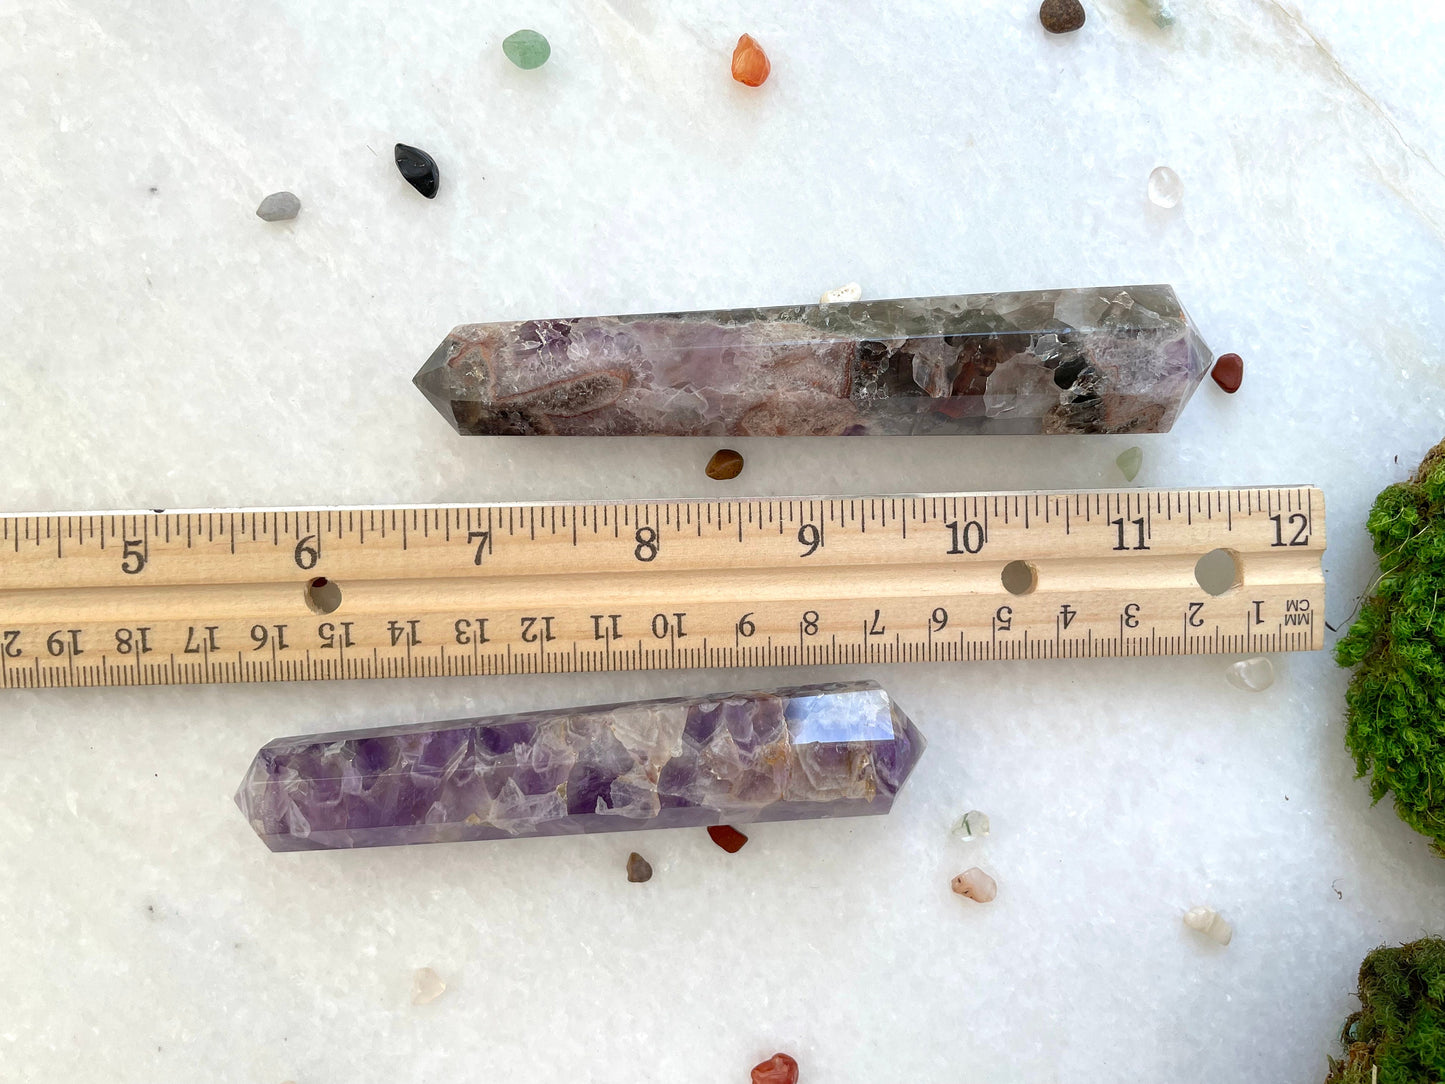 Double Terminated wand in Amethyst